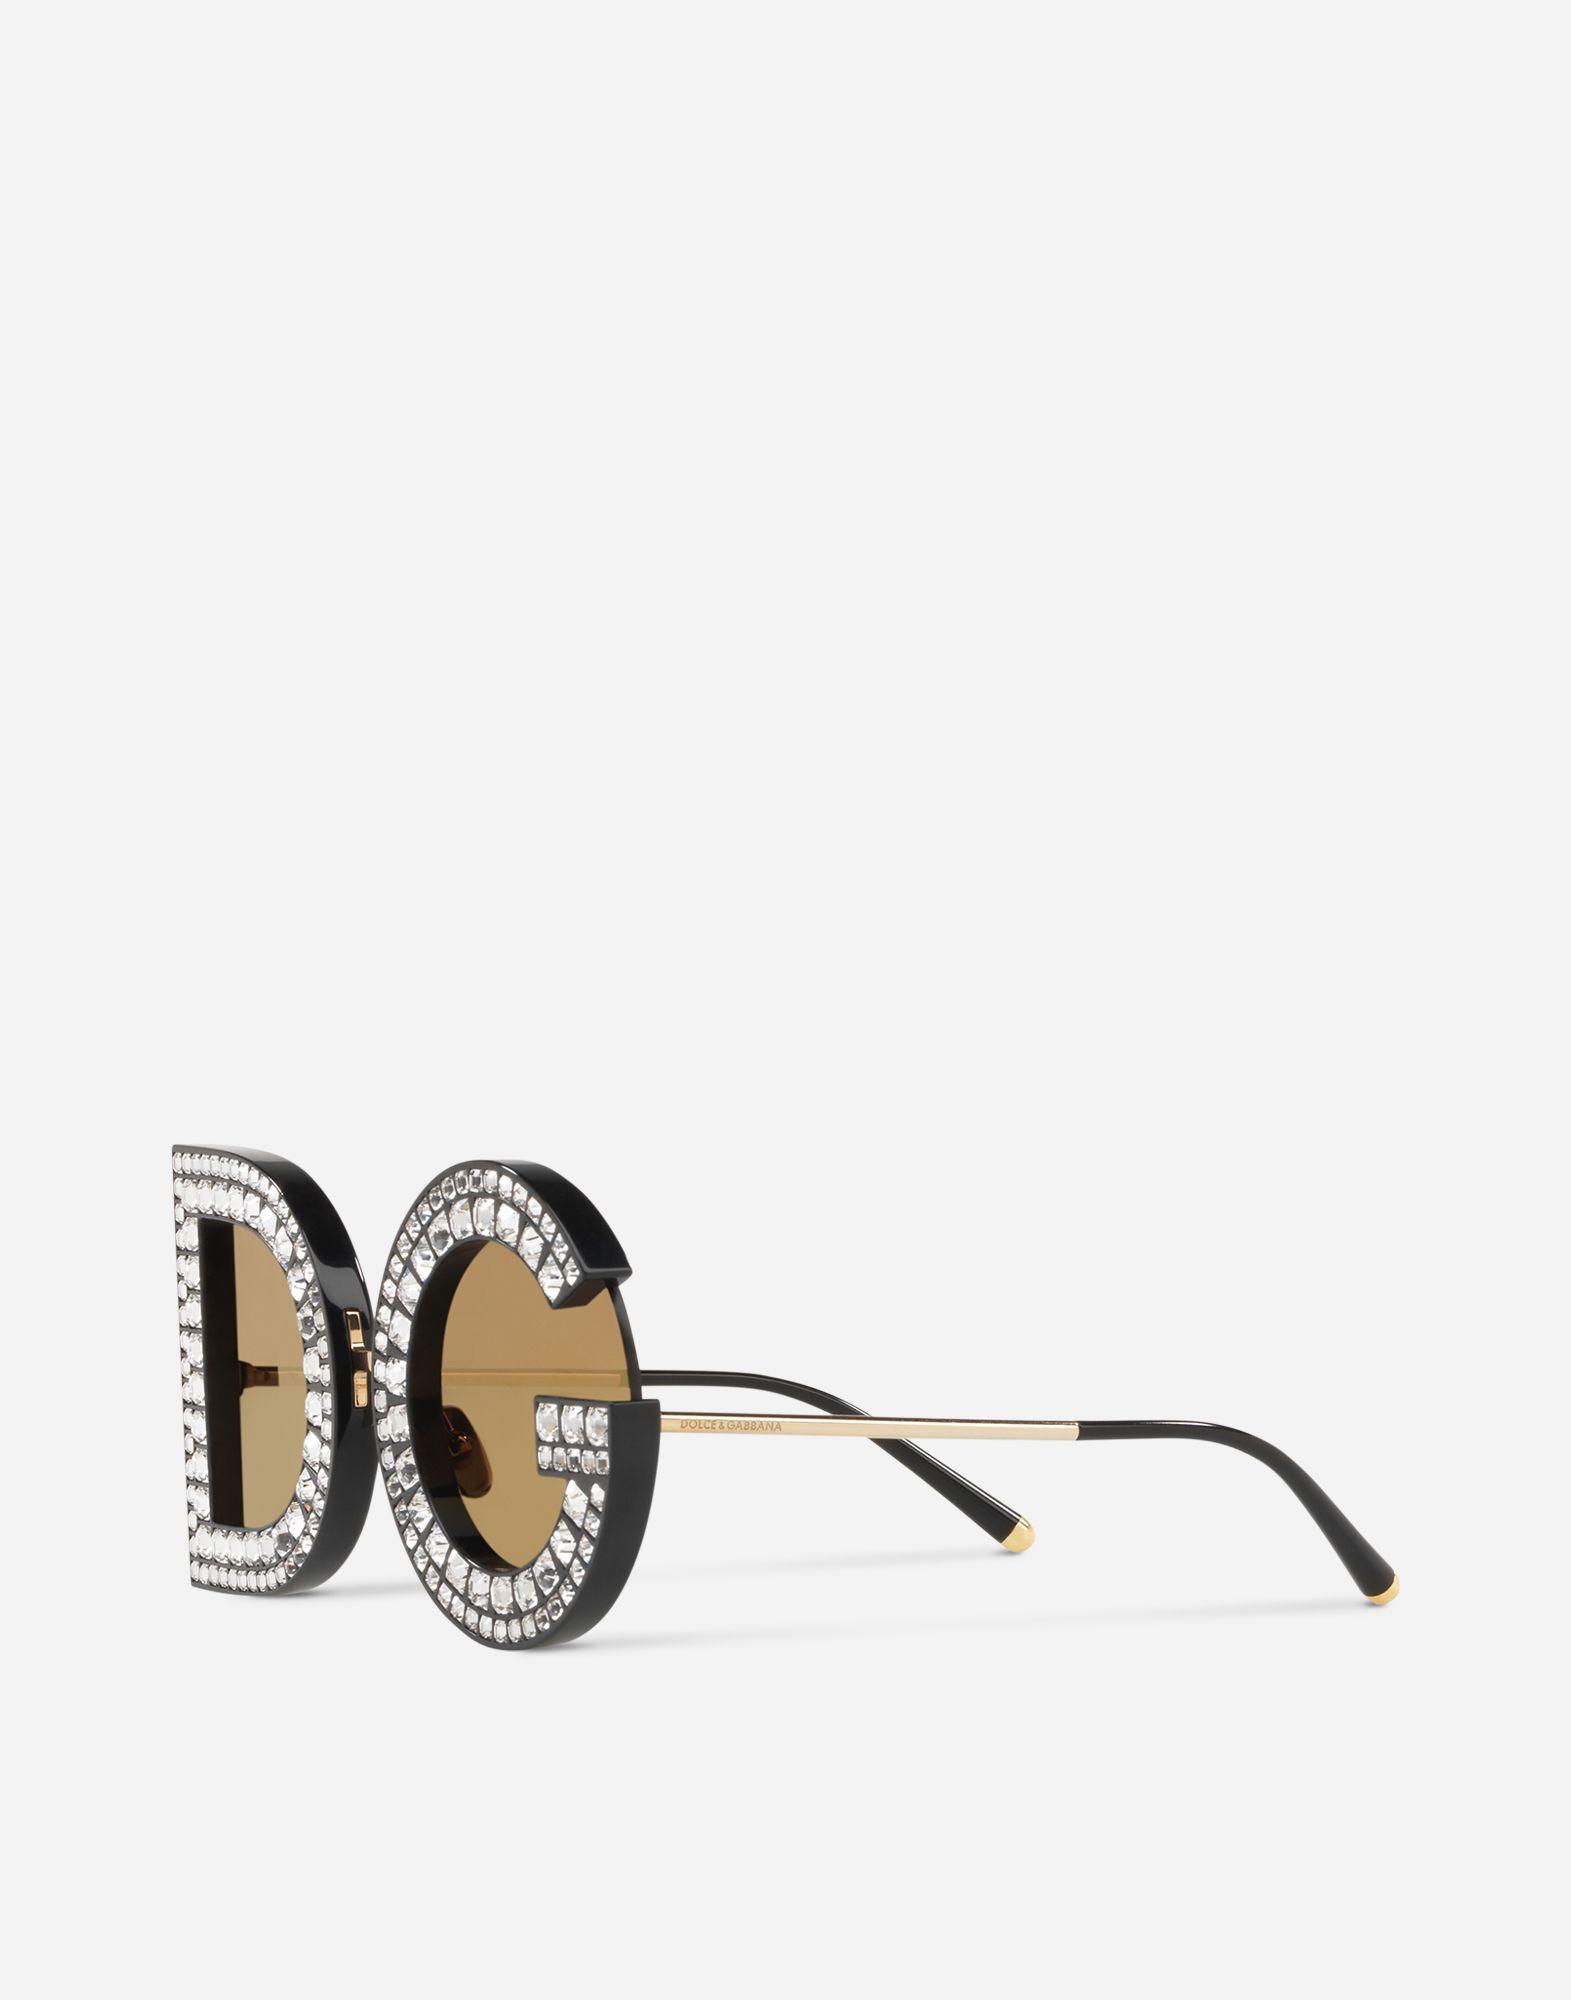 Dolce and Gabanna Logo - Women's Sunglasses | Dolce&Gabbana - DG SUNGLASSES WITH CRYSTAL DETAILS